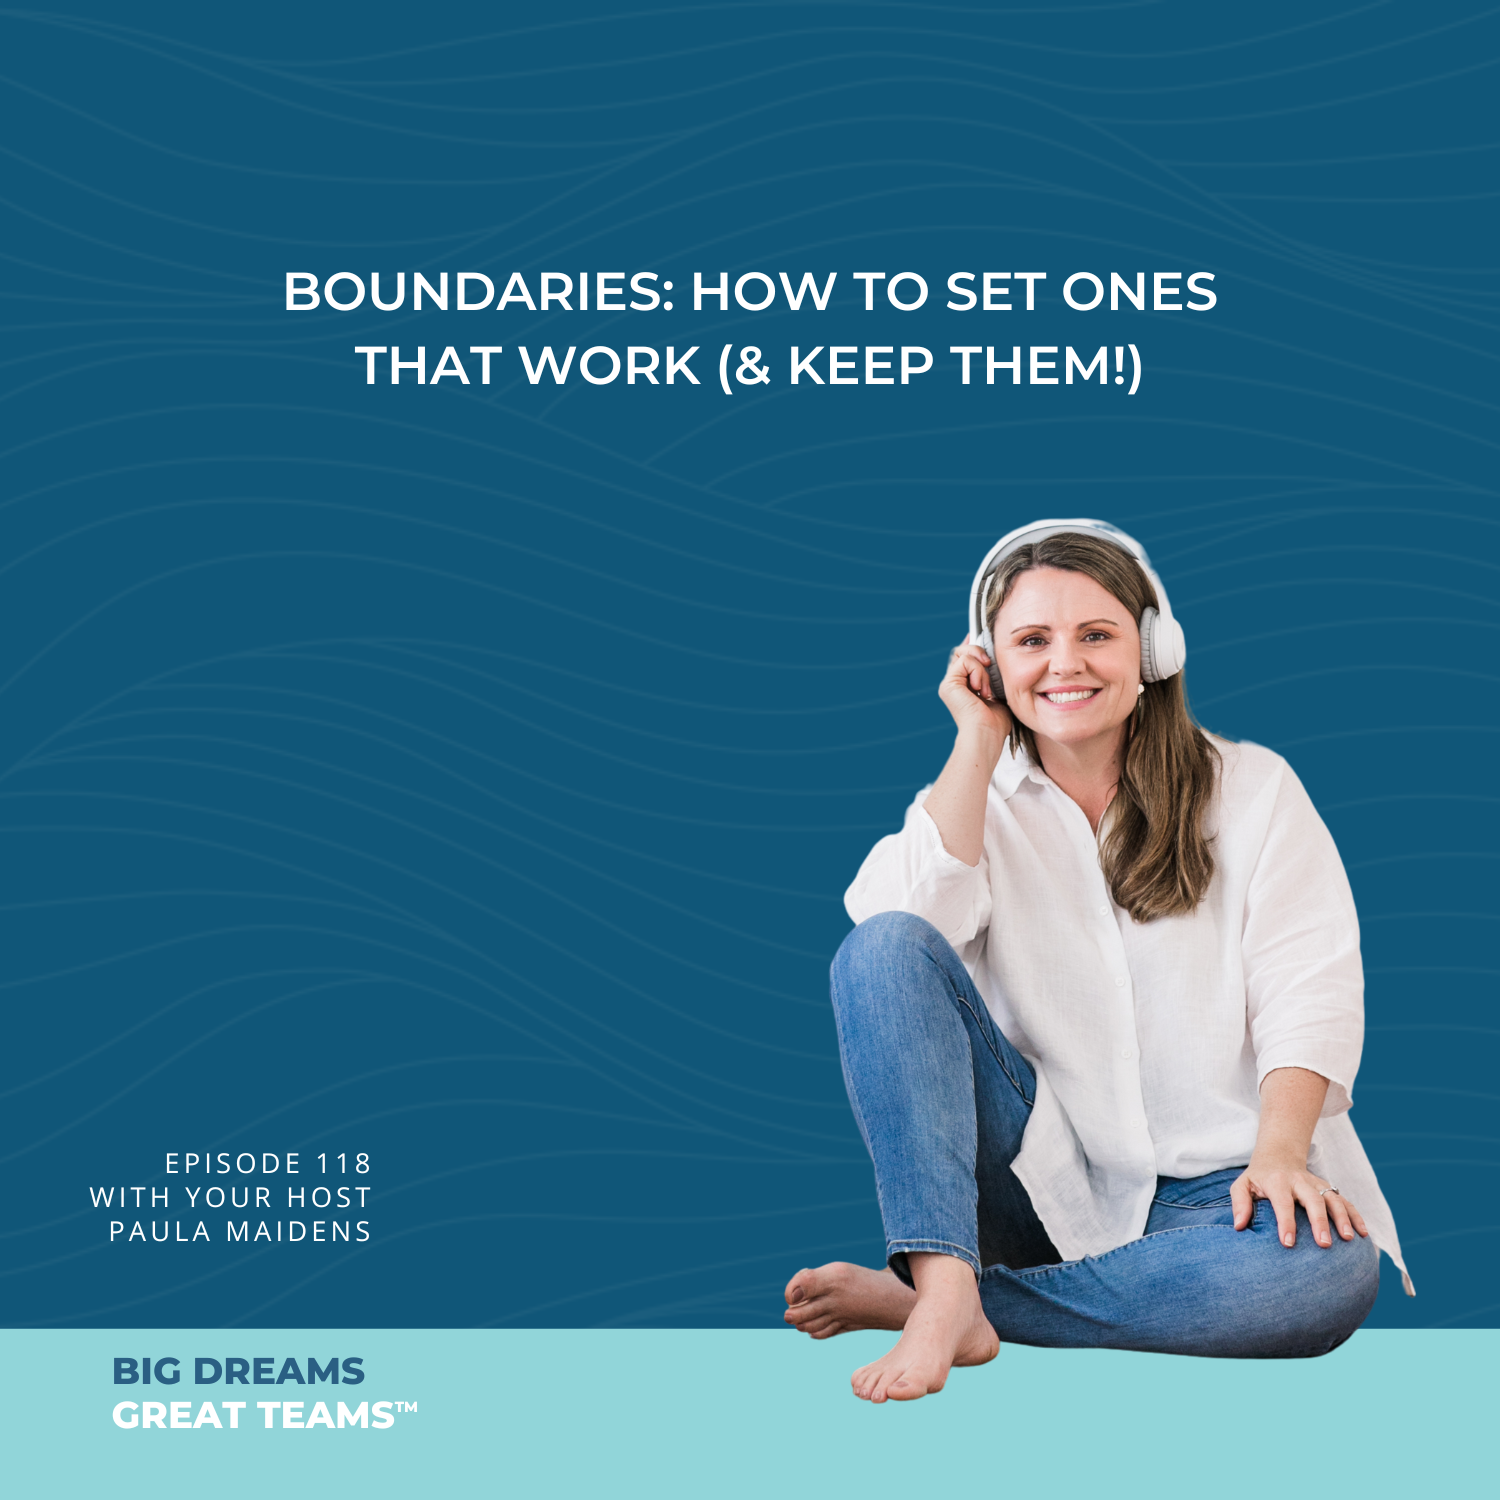 Episode 118 - Boundaries: How to set ones that work (& keep them!)